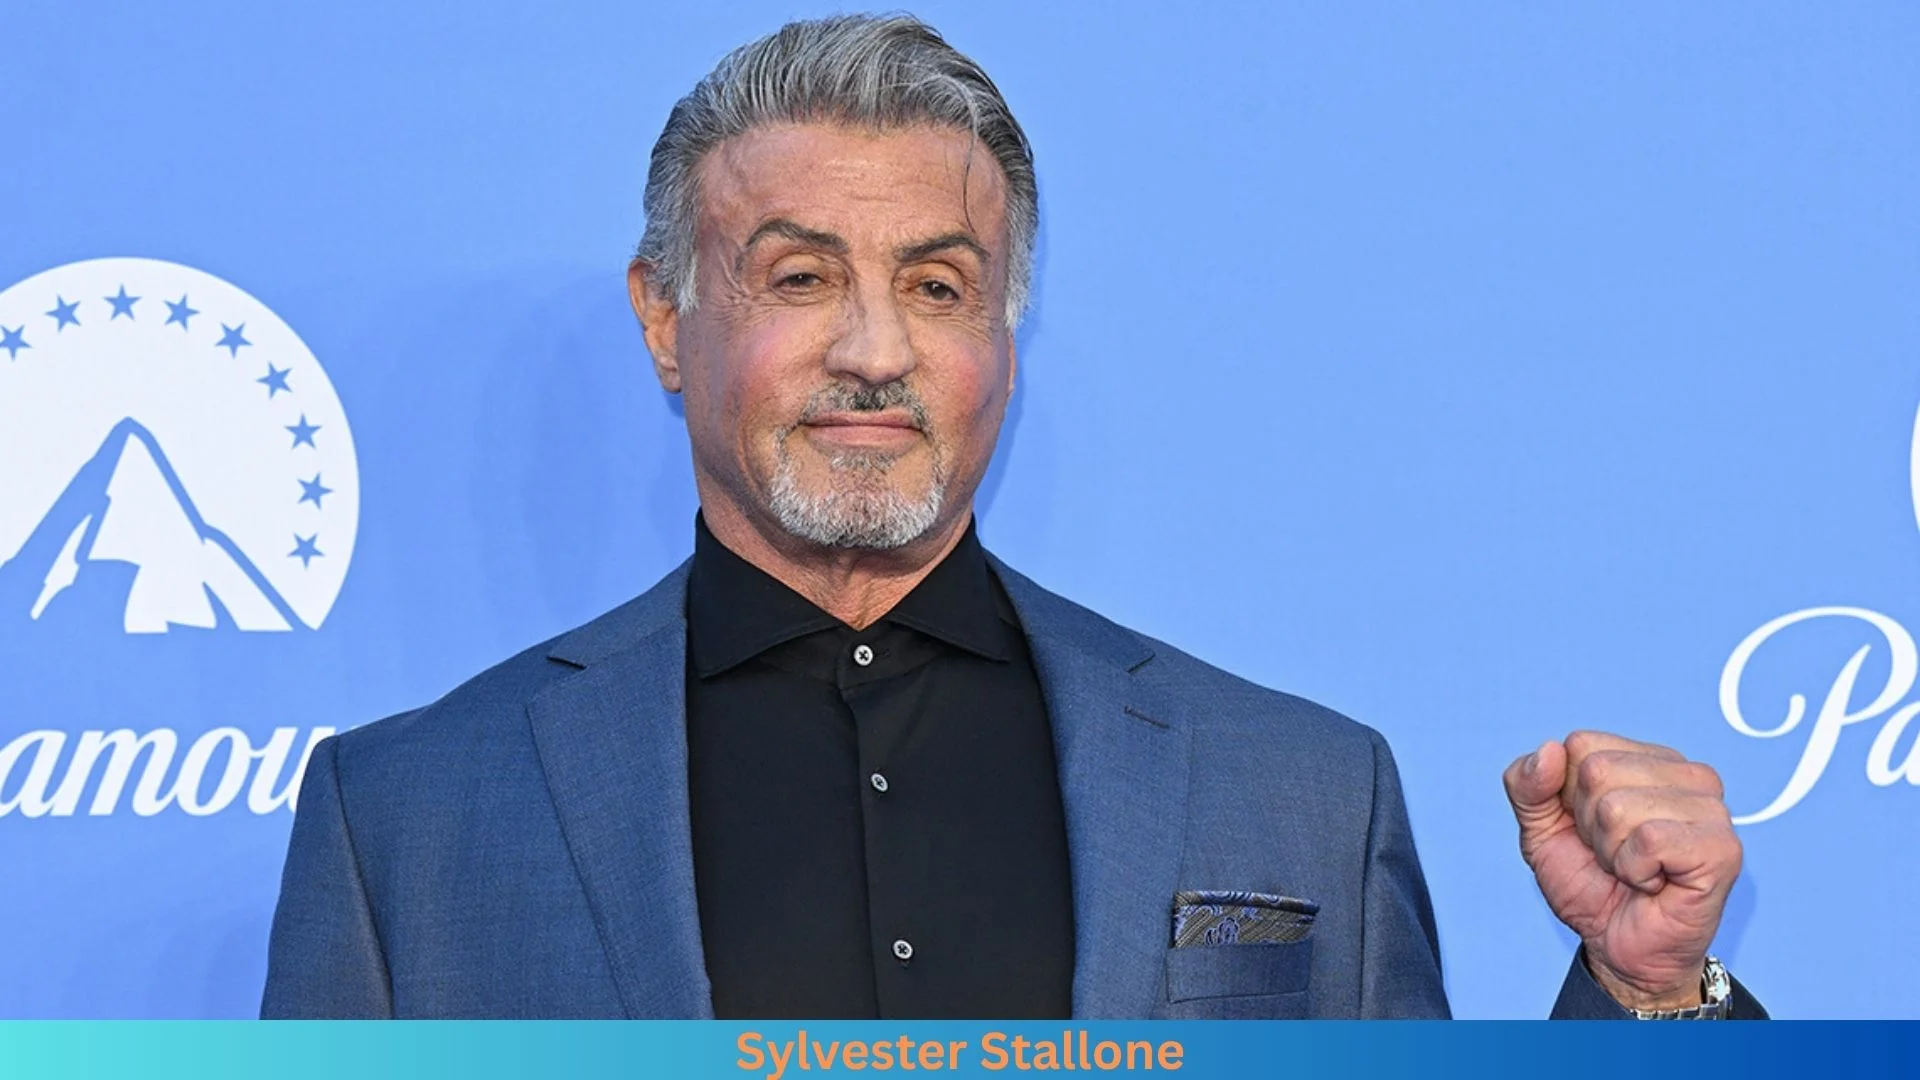 Net Worth of Sylvester Stallone